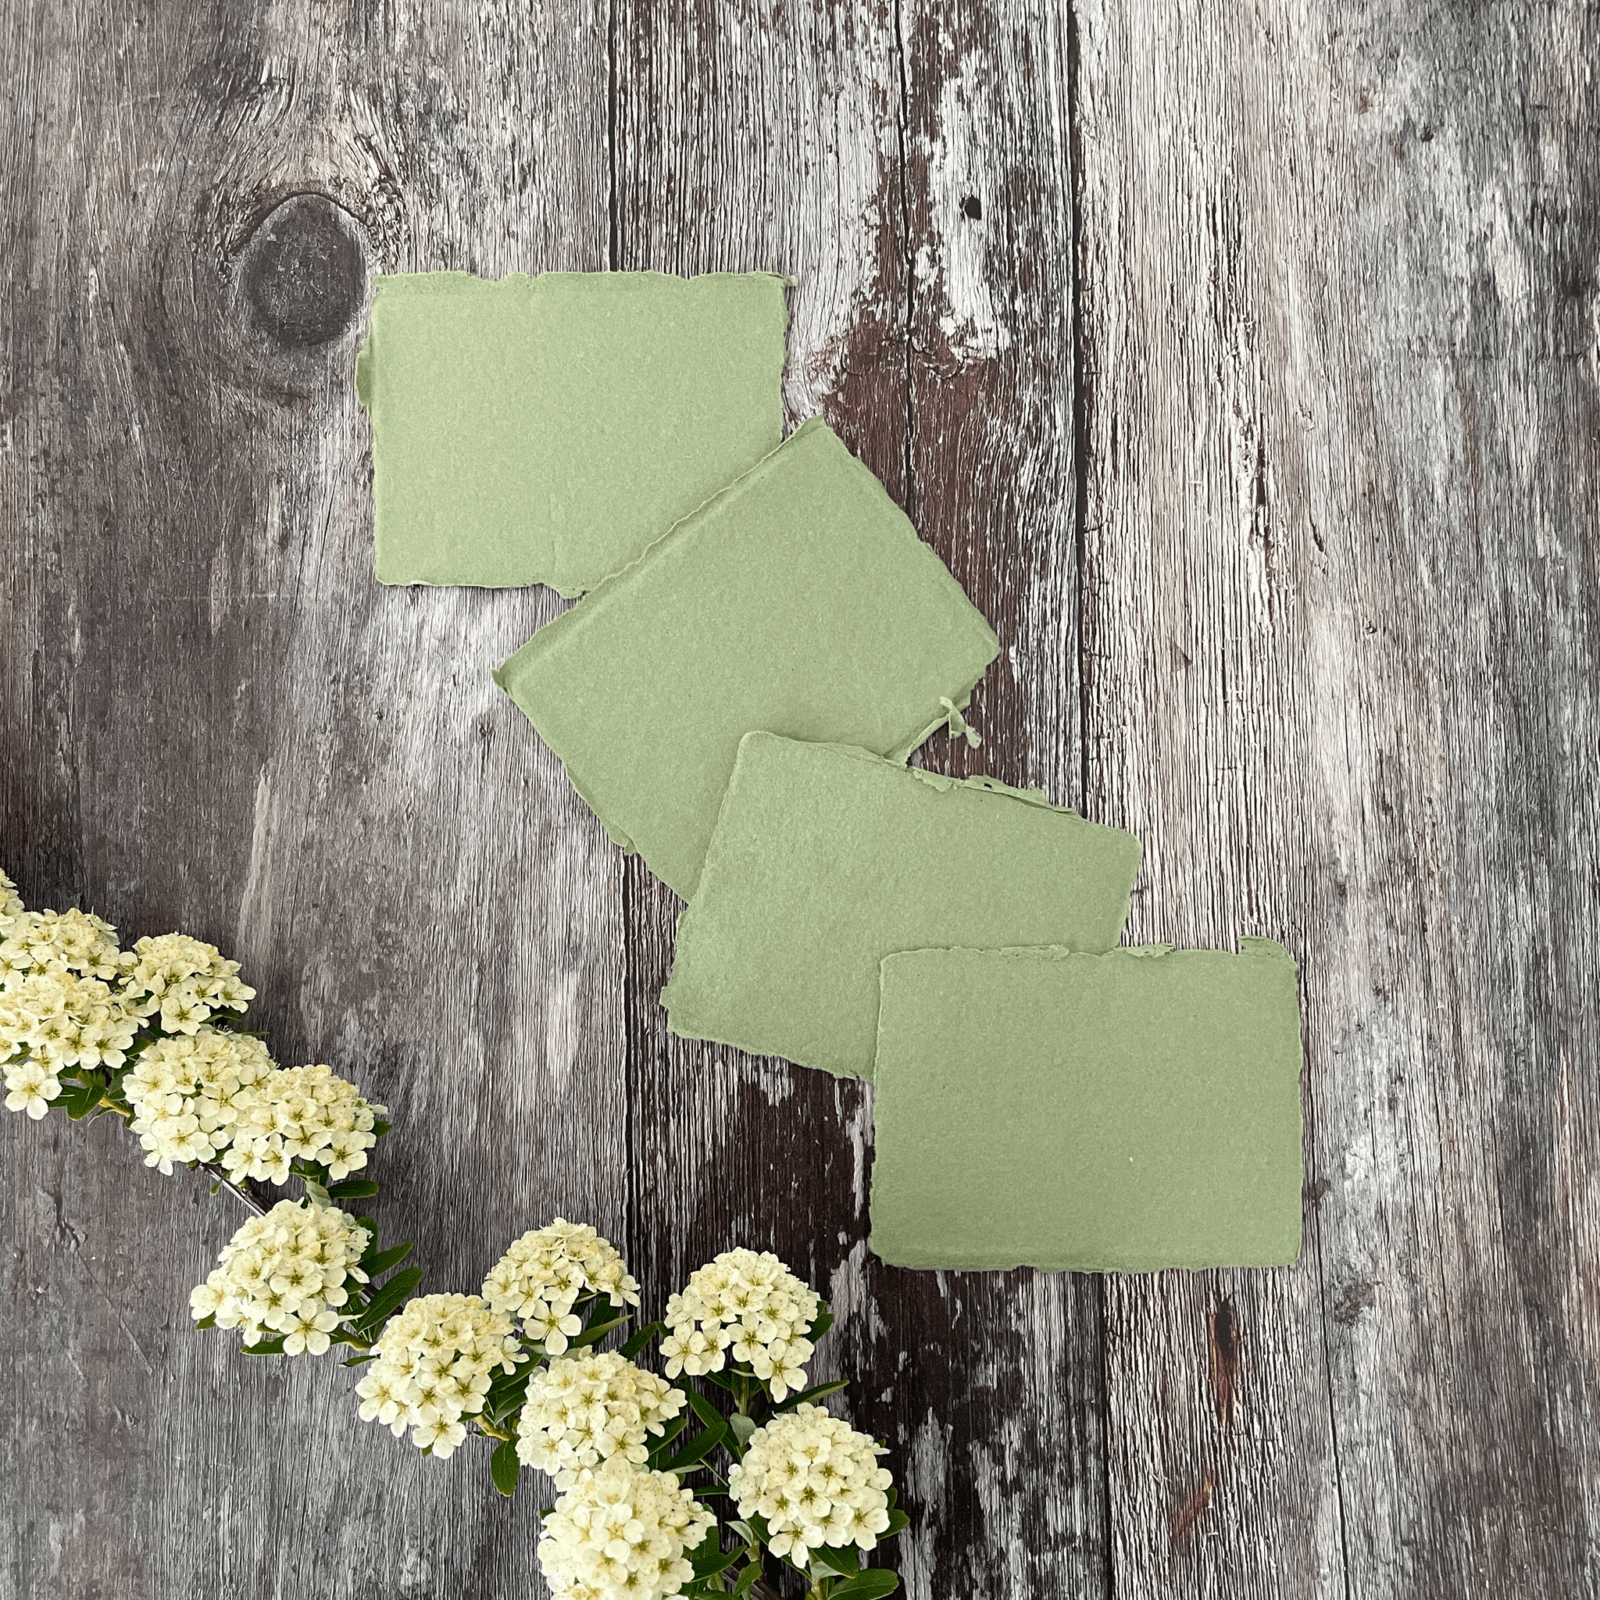 placecards-made-from-recycled-cotton-rag-paper-in-sage-green